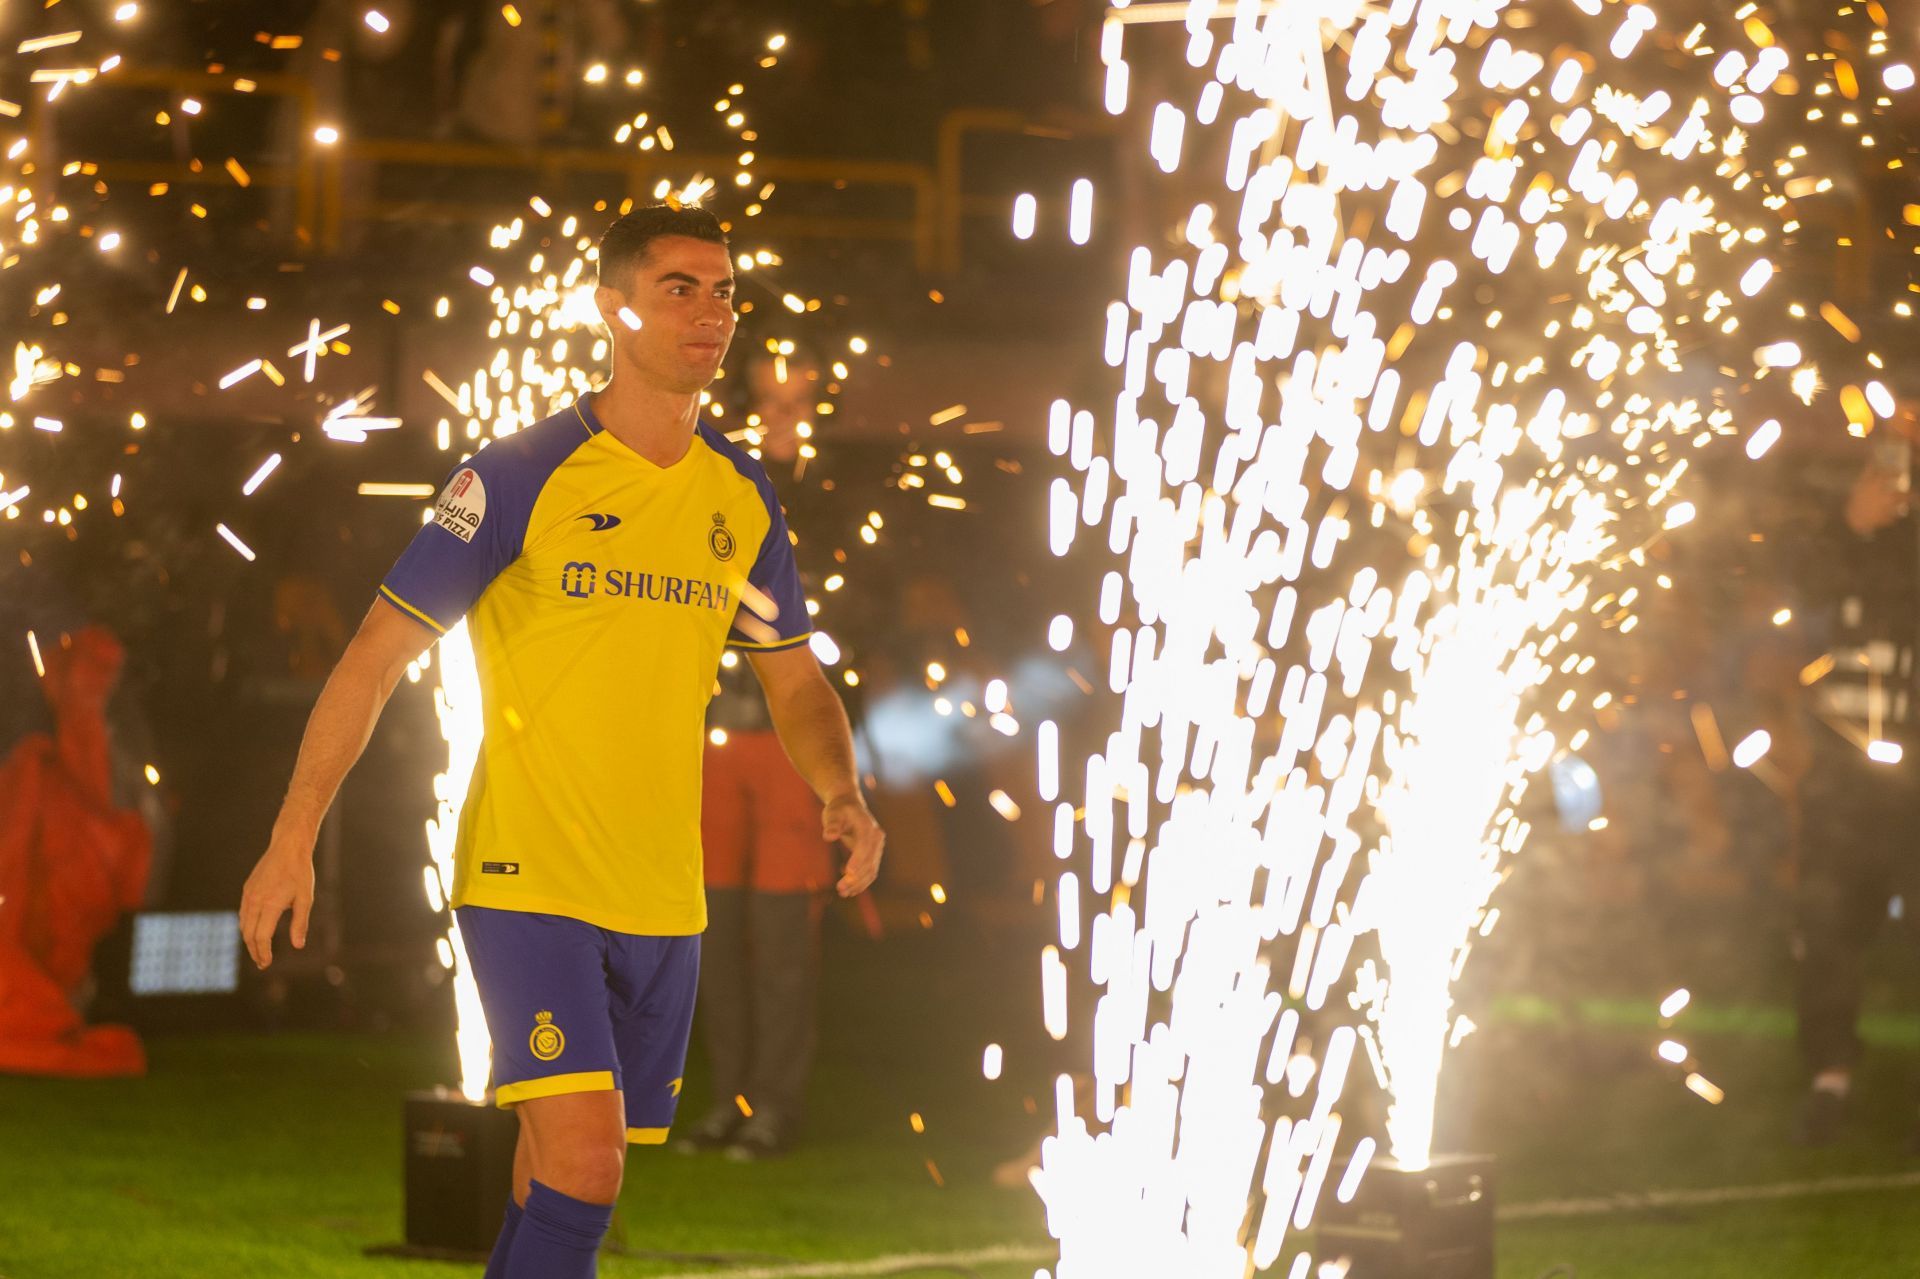 Cristiano Ronaldo is Officially Unveiled as Al-Nassr Player